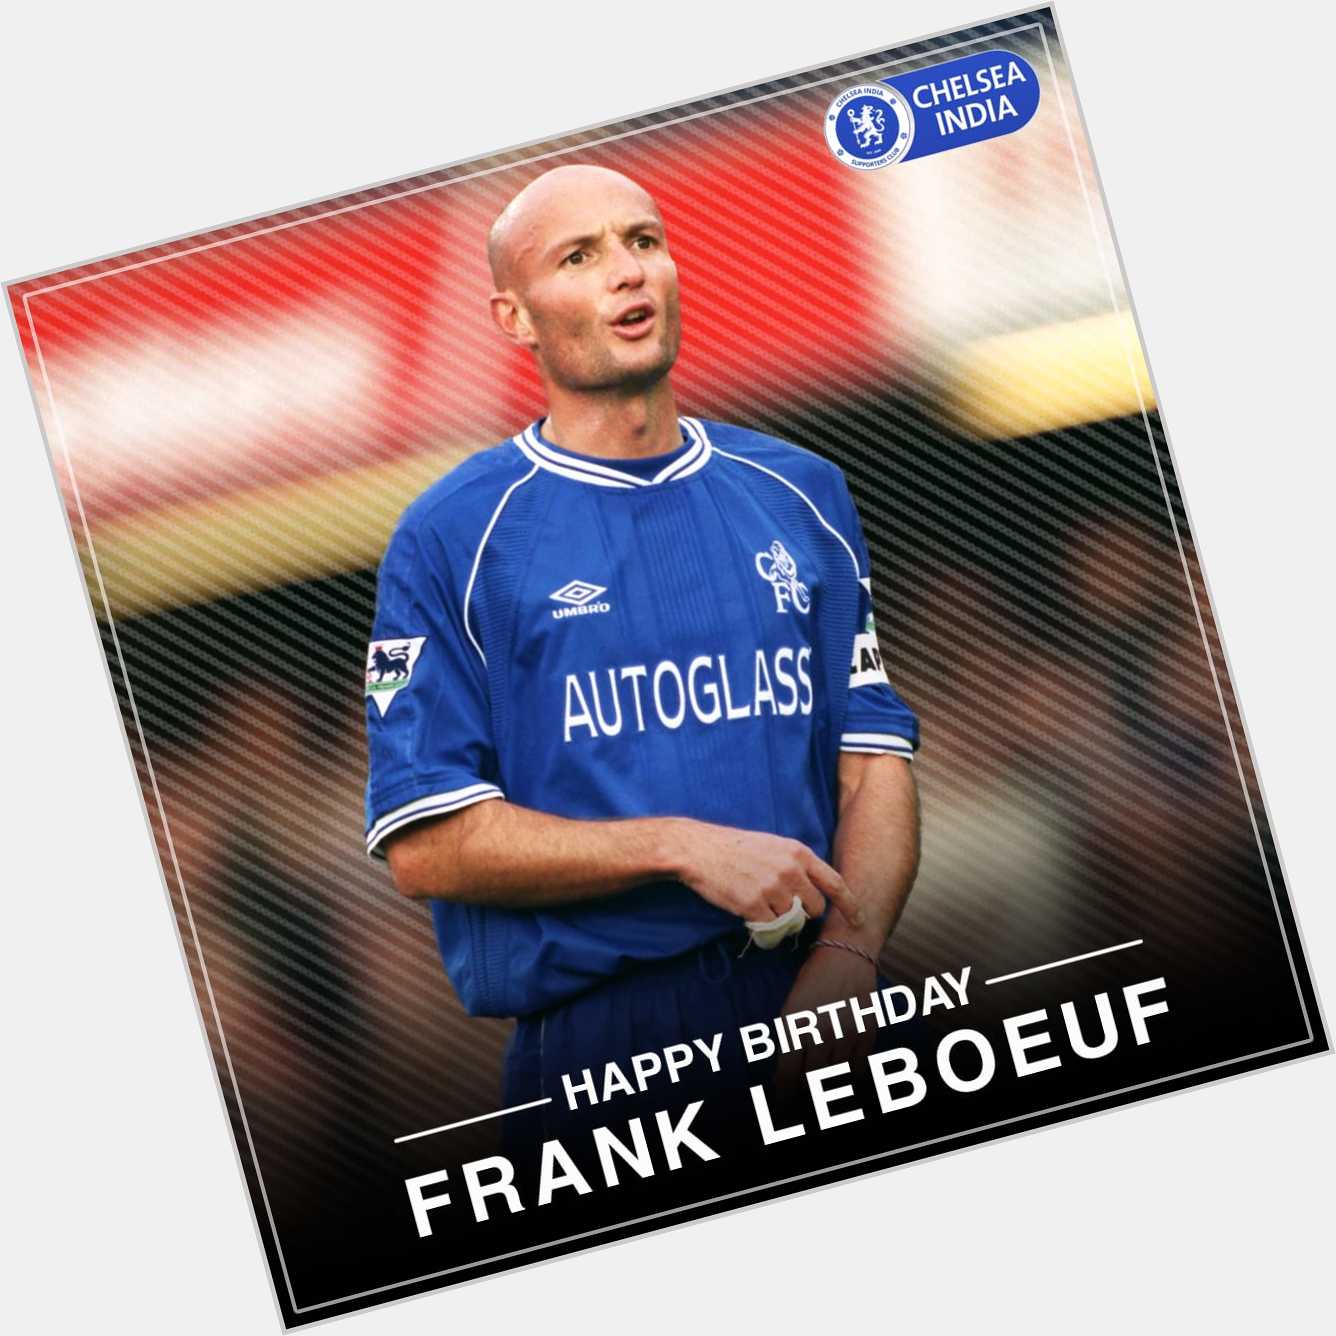 We wish our former defender, World Champion & UEFA Super Cup winner, Frank Leboeuf a very Happy Birthday!  